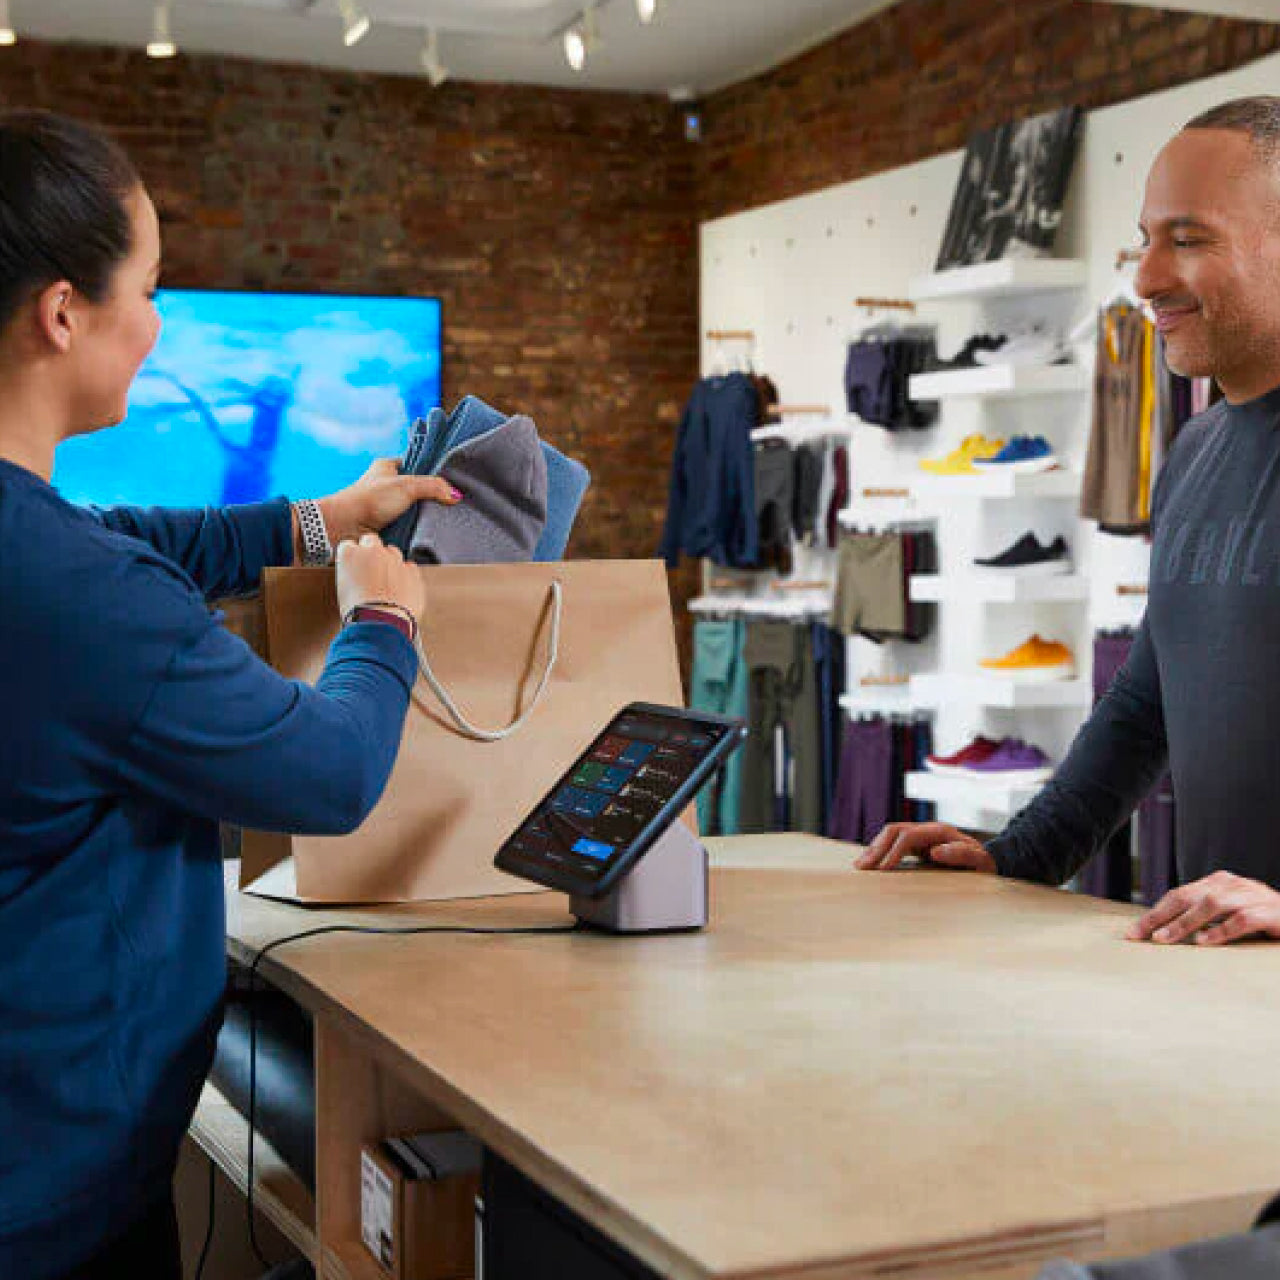 Person checking out using Shopify POS